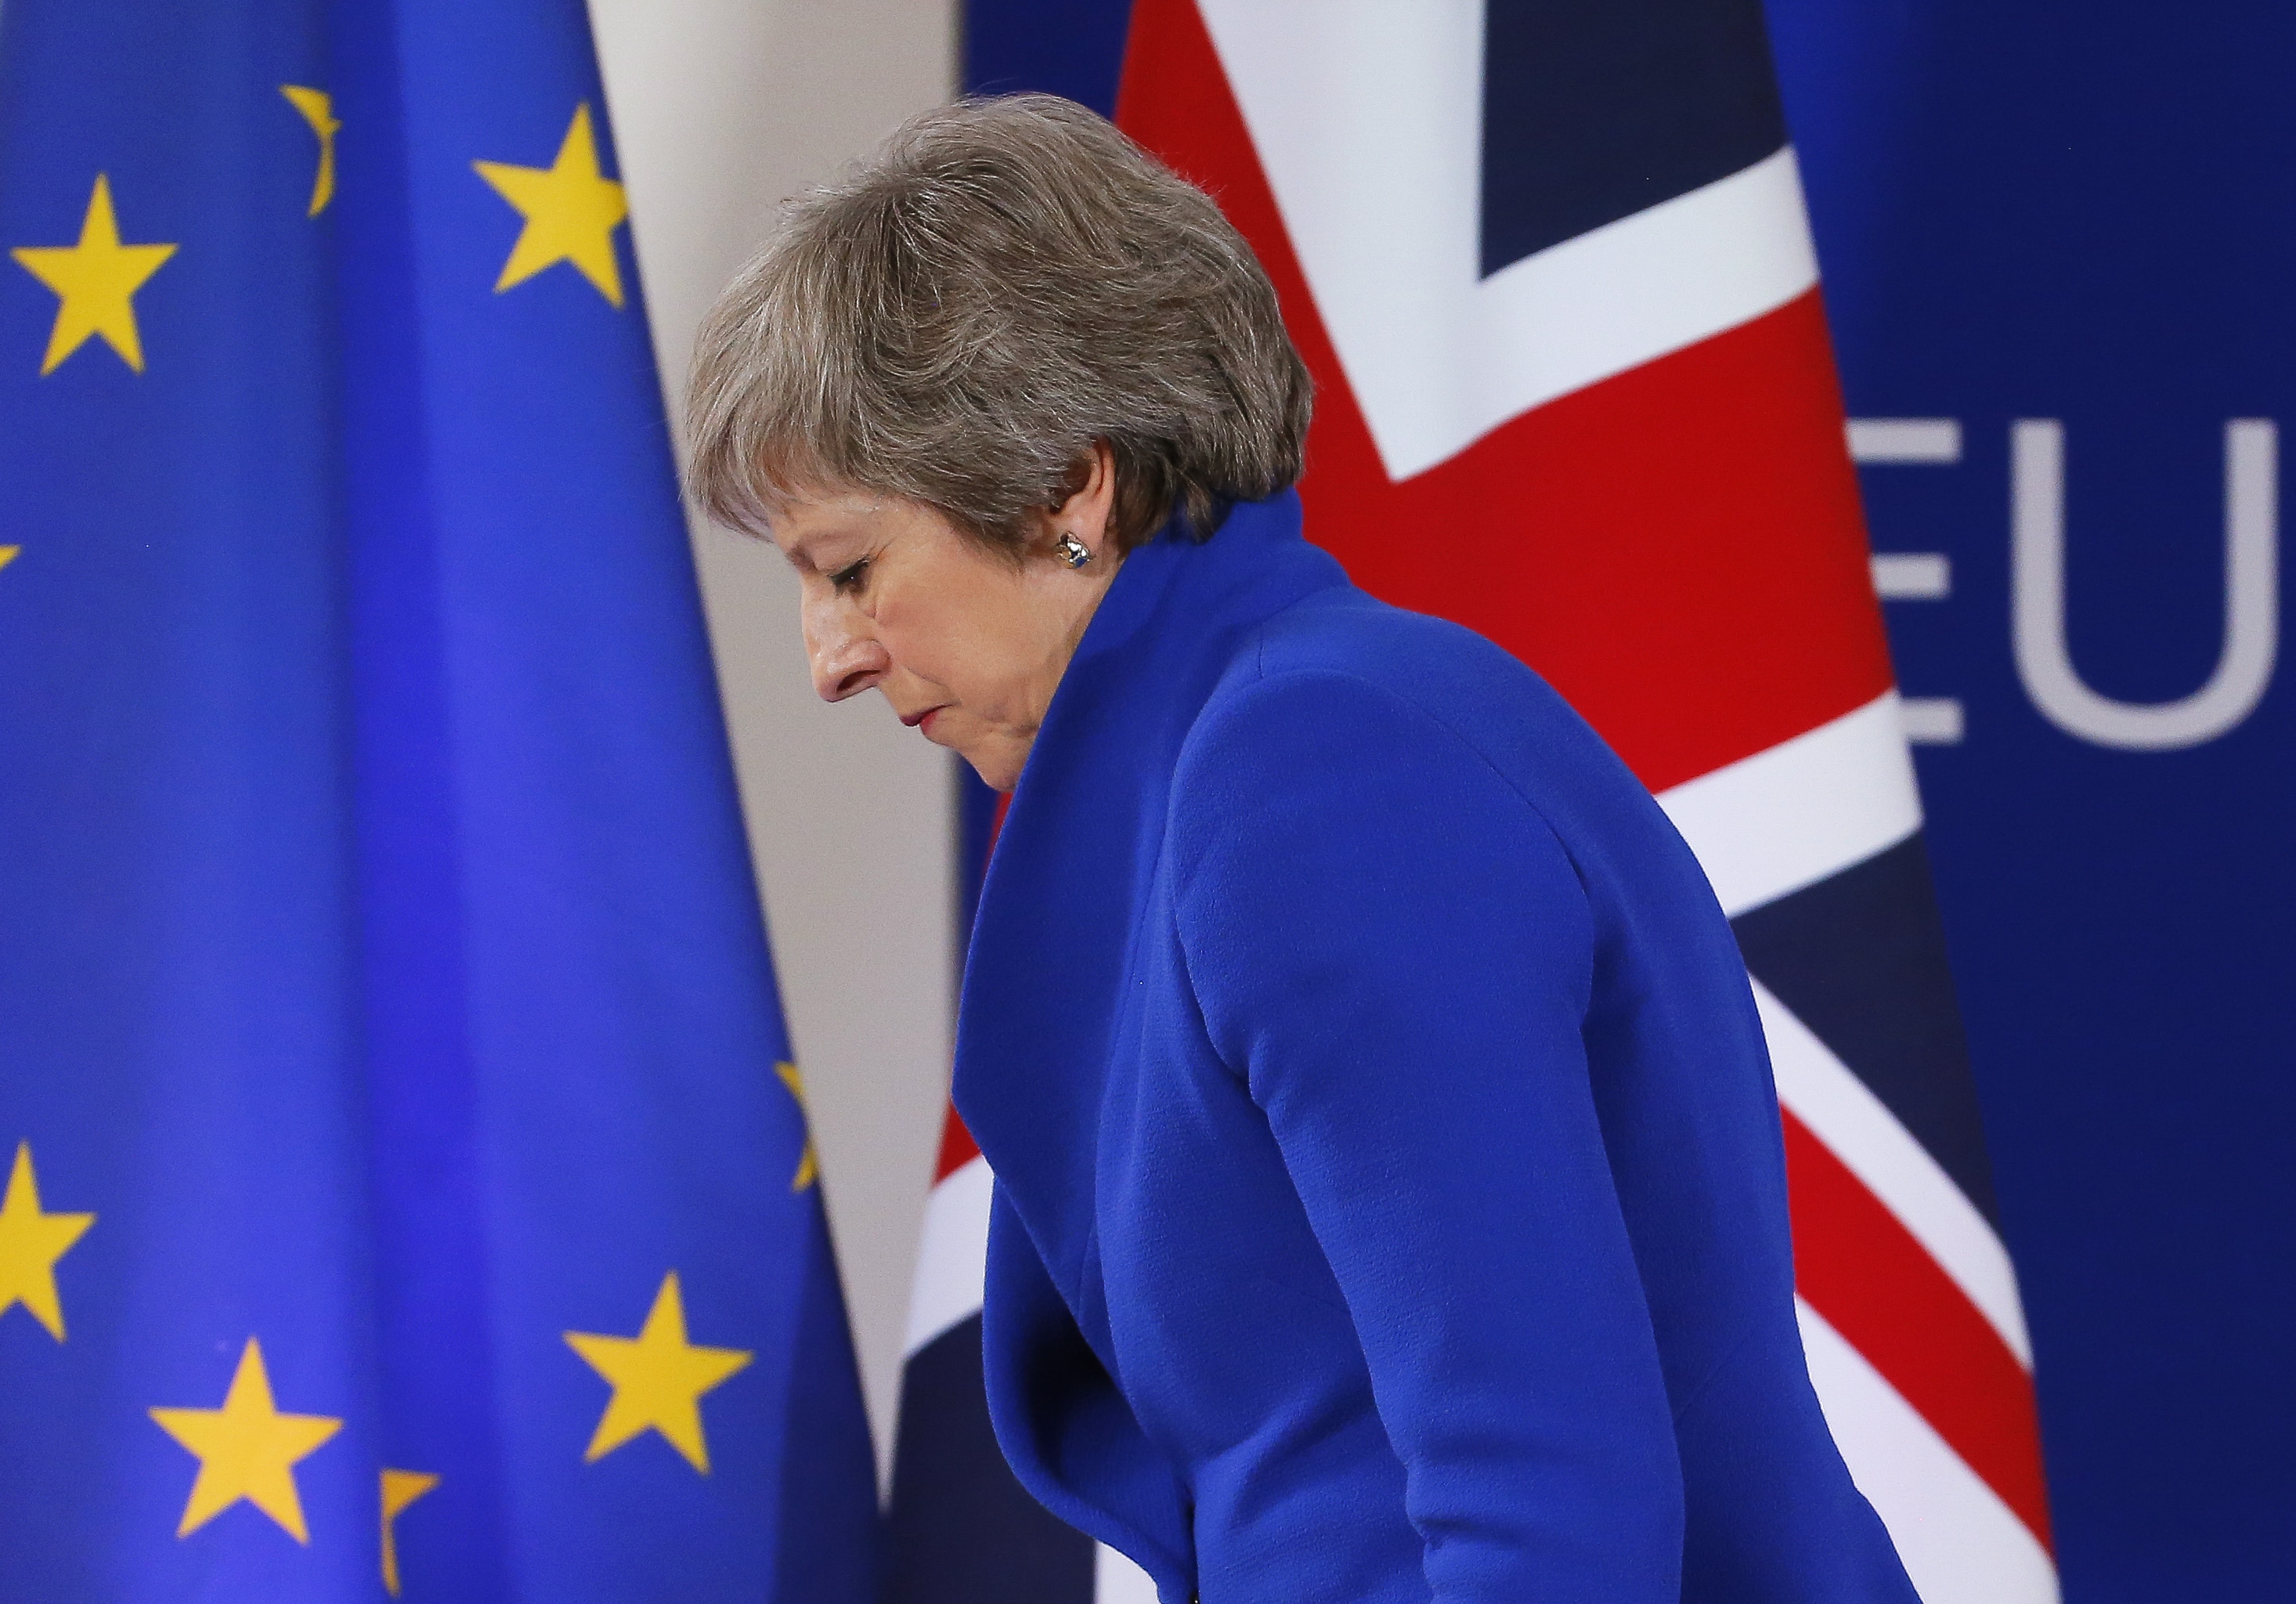 epa07221420 (FILE) - British Prime Minister Theresa May gives a press conference at the end of the European Council meeting in Brussels, Belgium, 25 November 2018, (reissued 10 December 2018). Media reports on 10 December 2018 state that Theresa May is to make a statement to British Membersof Parliament later in the day amid reports the the Meaningful Vote due to take place on 11 December 2018 on her Brexit deal is being delayed.  EPA/OLIVIER HOSLET